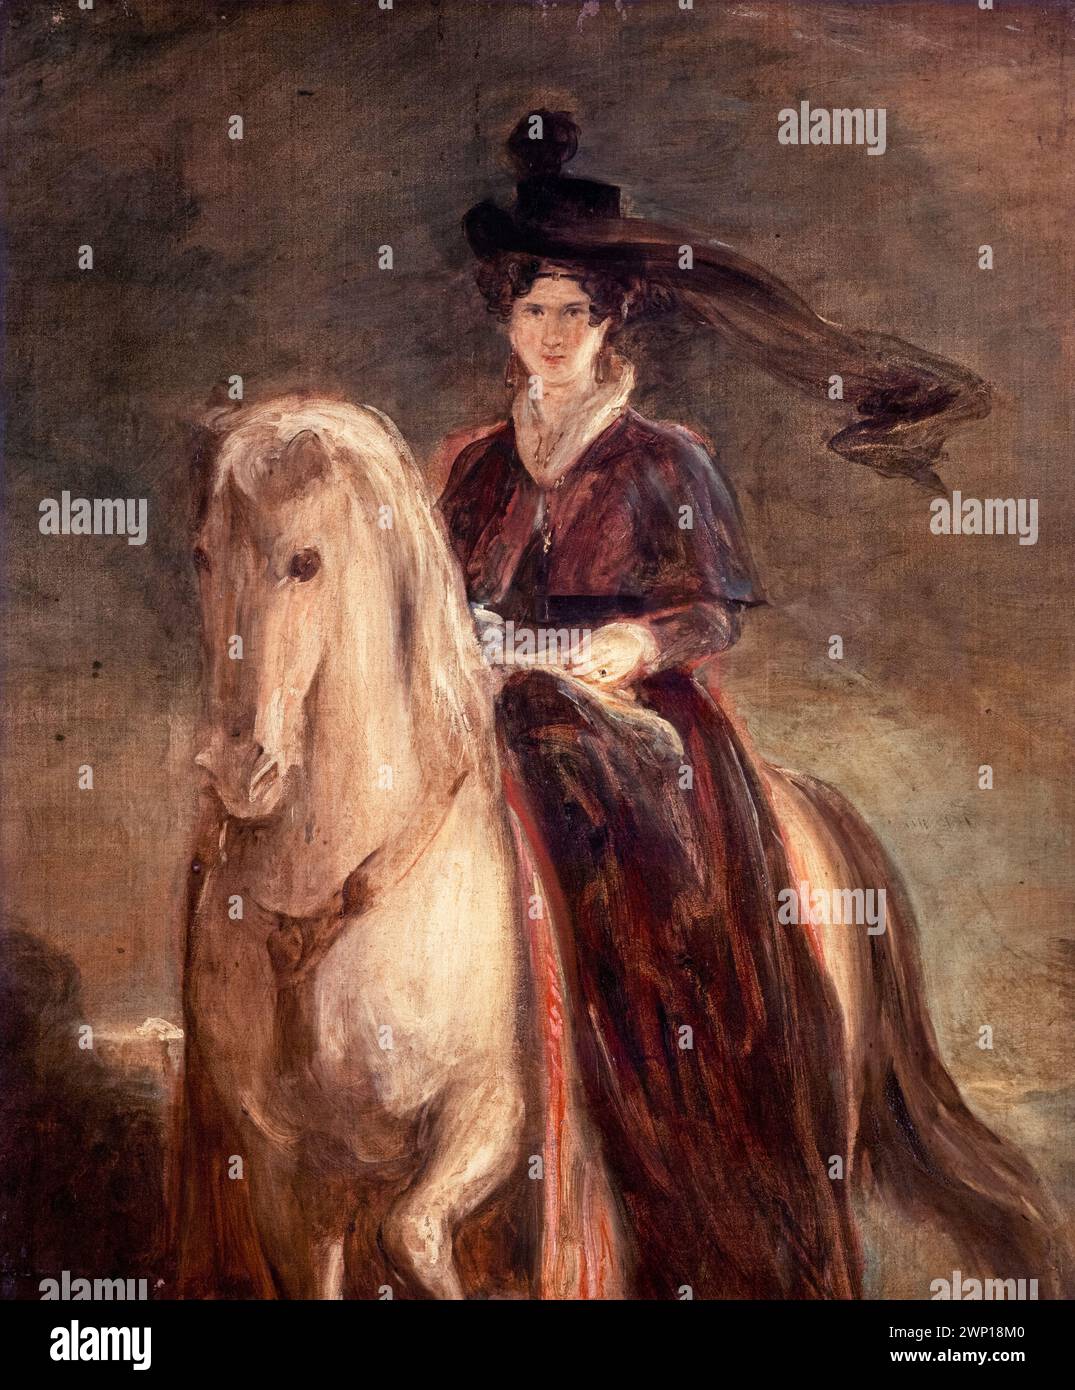 Queen Adelaide of Saxe-Meiningen (1792-1849) Queen Consort of the United Kingdom and Hanover (1830-1837), equestrian portrait in oil on canvas by Sir David Wilkie, circa 1833 Stock Photo